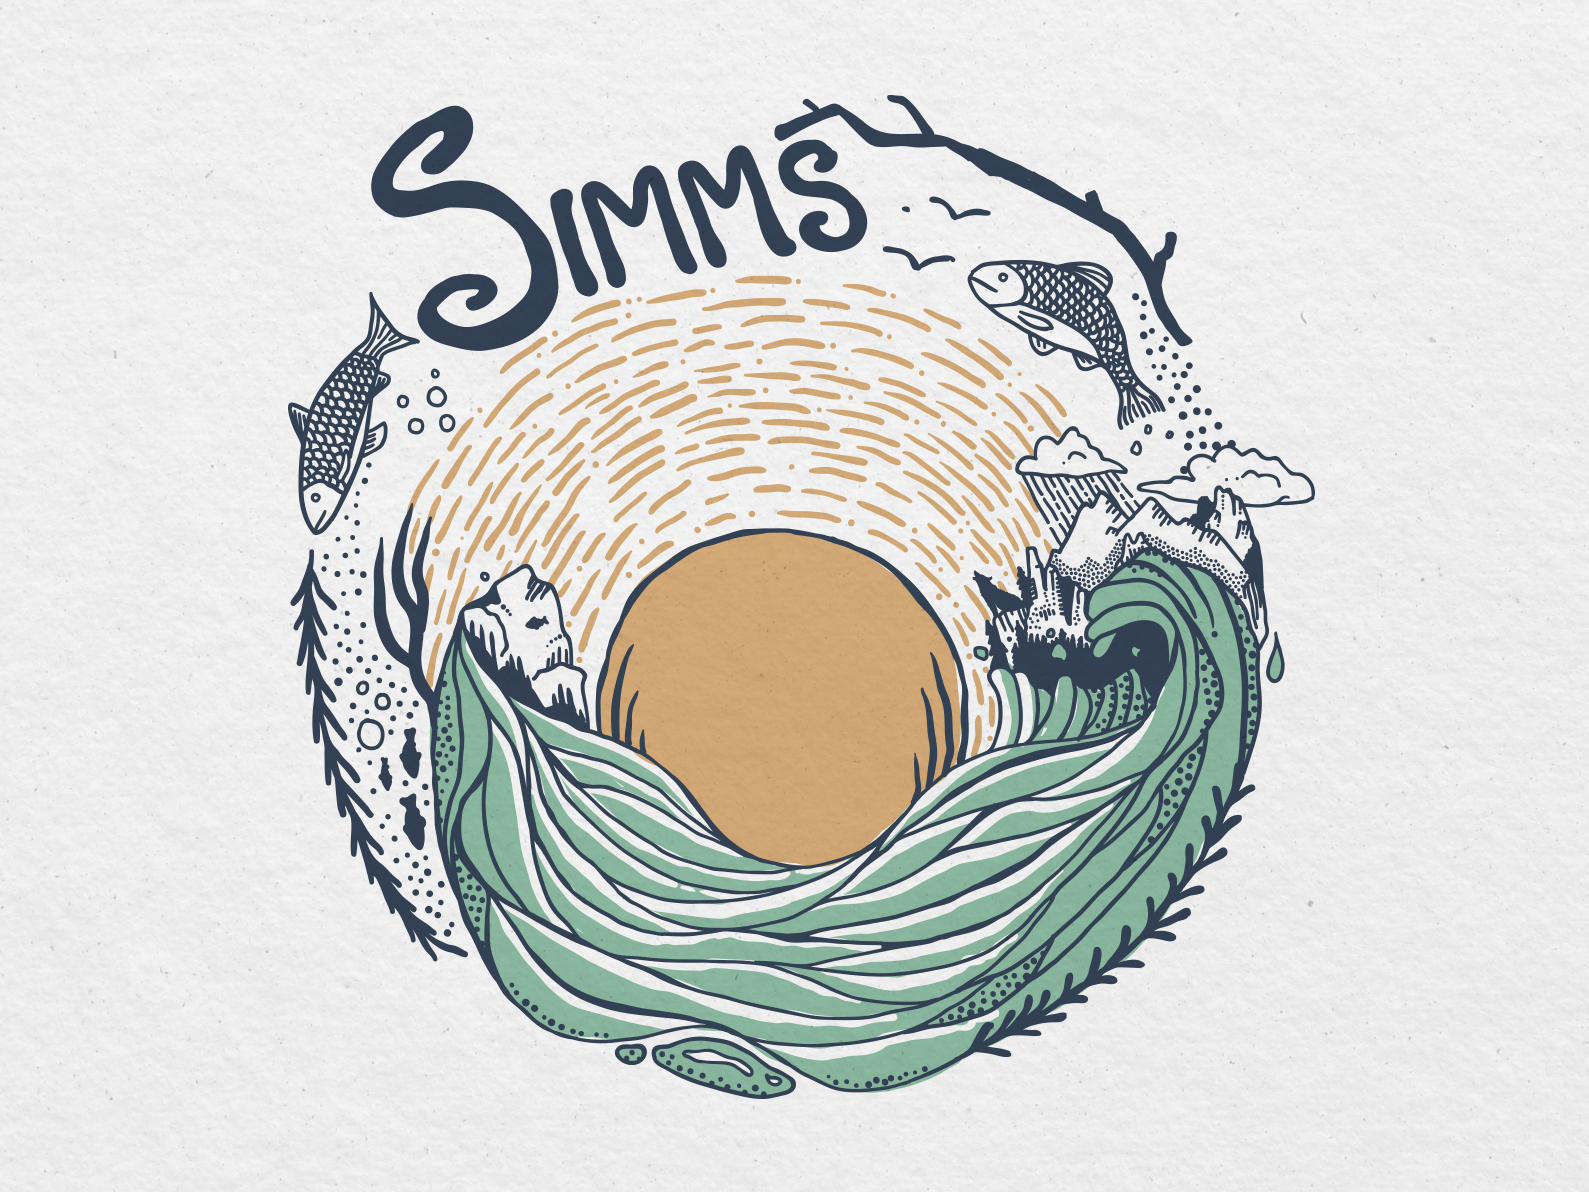 Concept work for Simms Fishing